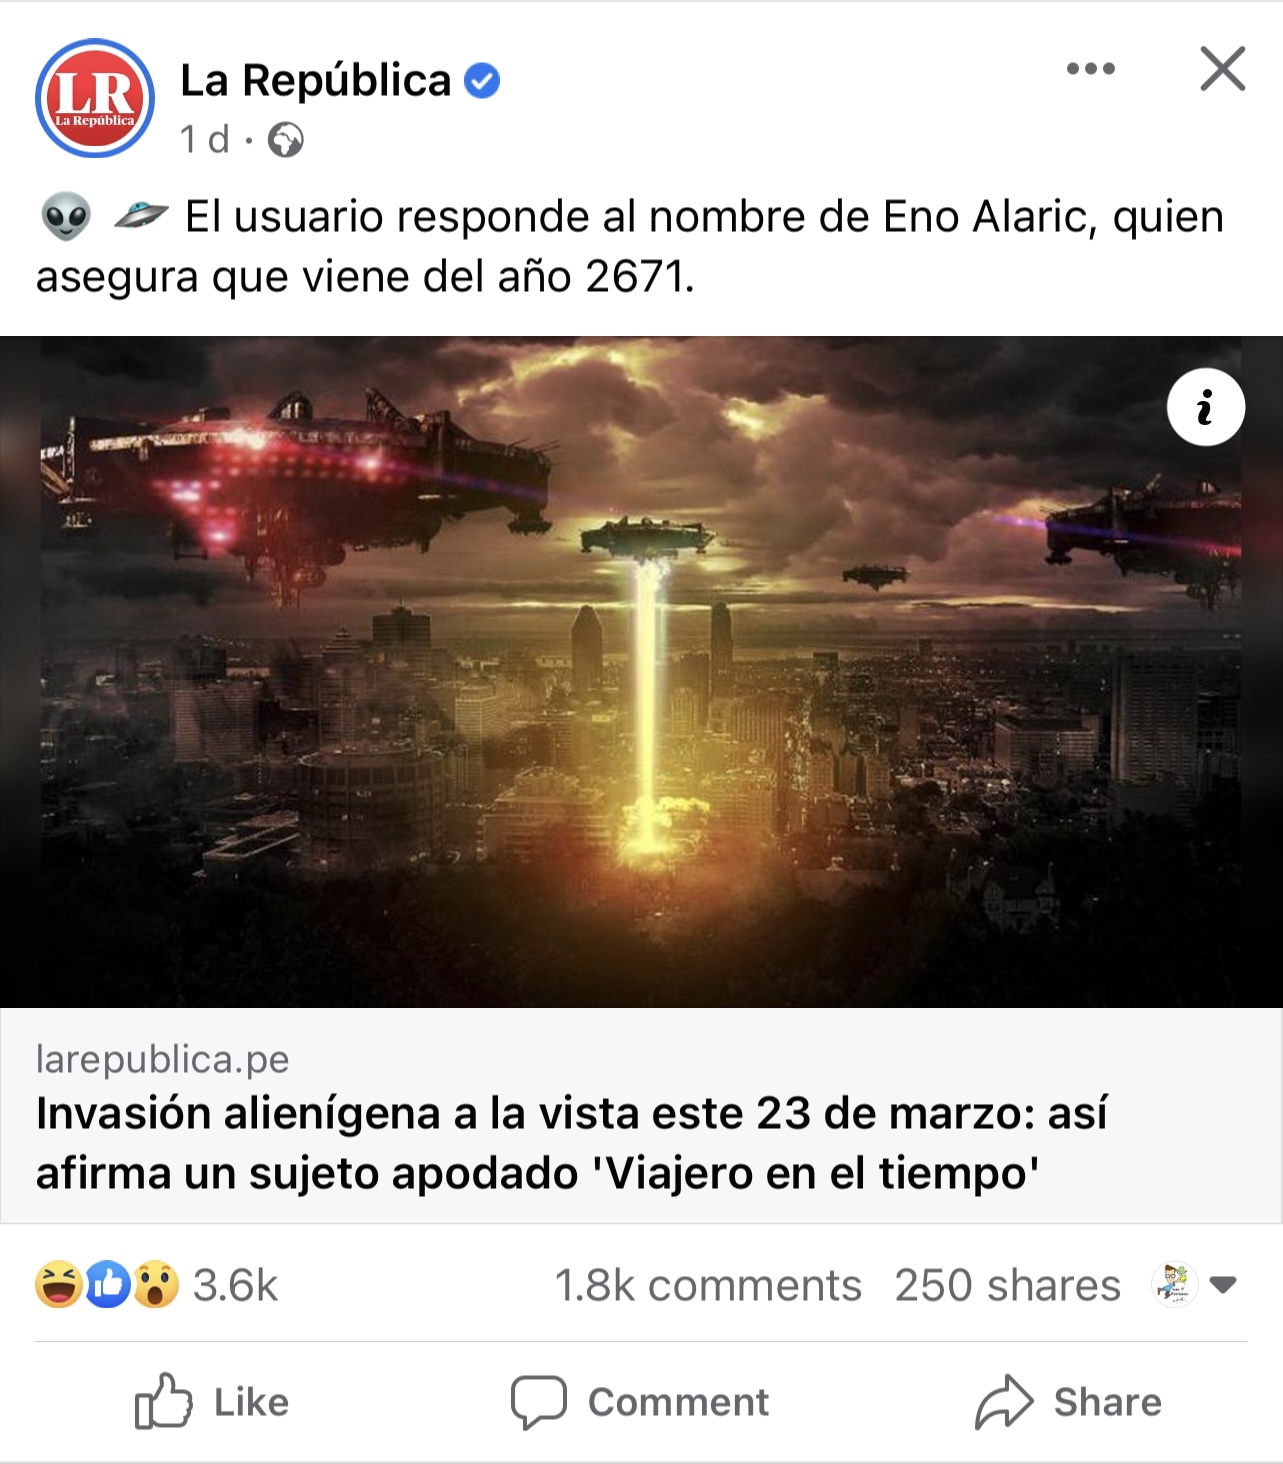 An image of an article from "La Republica" on Facebook that mentions time travelers warning of impending alien invasions. This article was not subject to fact checking. Credit: Ivan Petricevic.